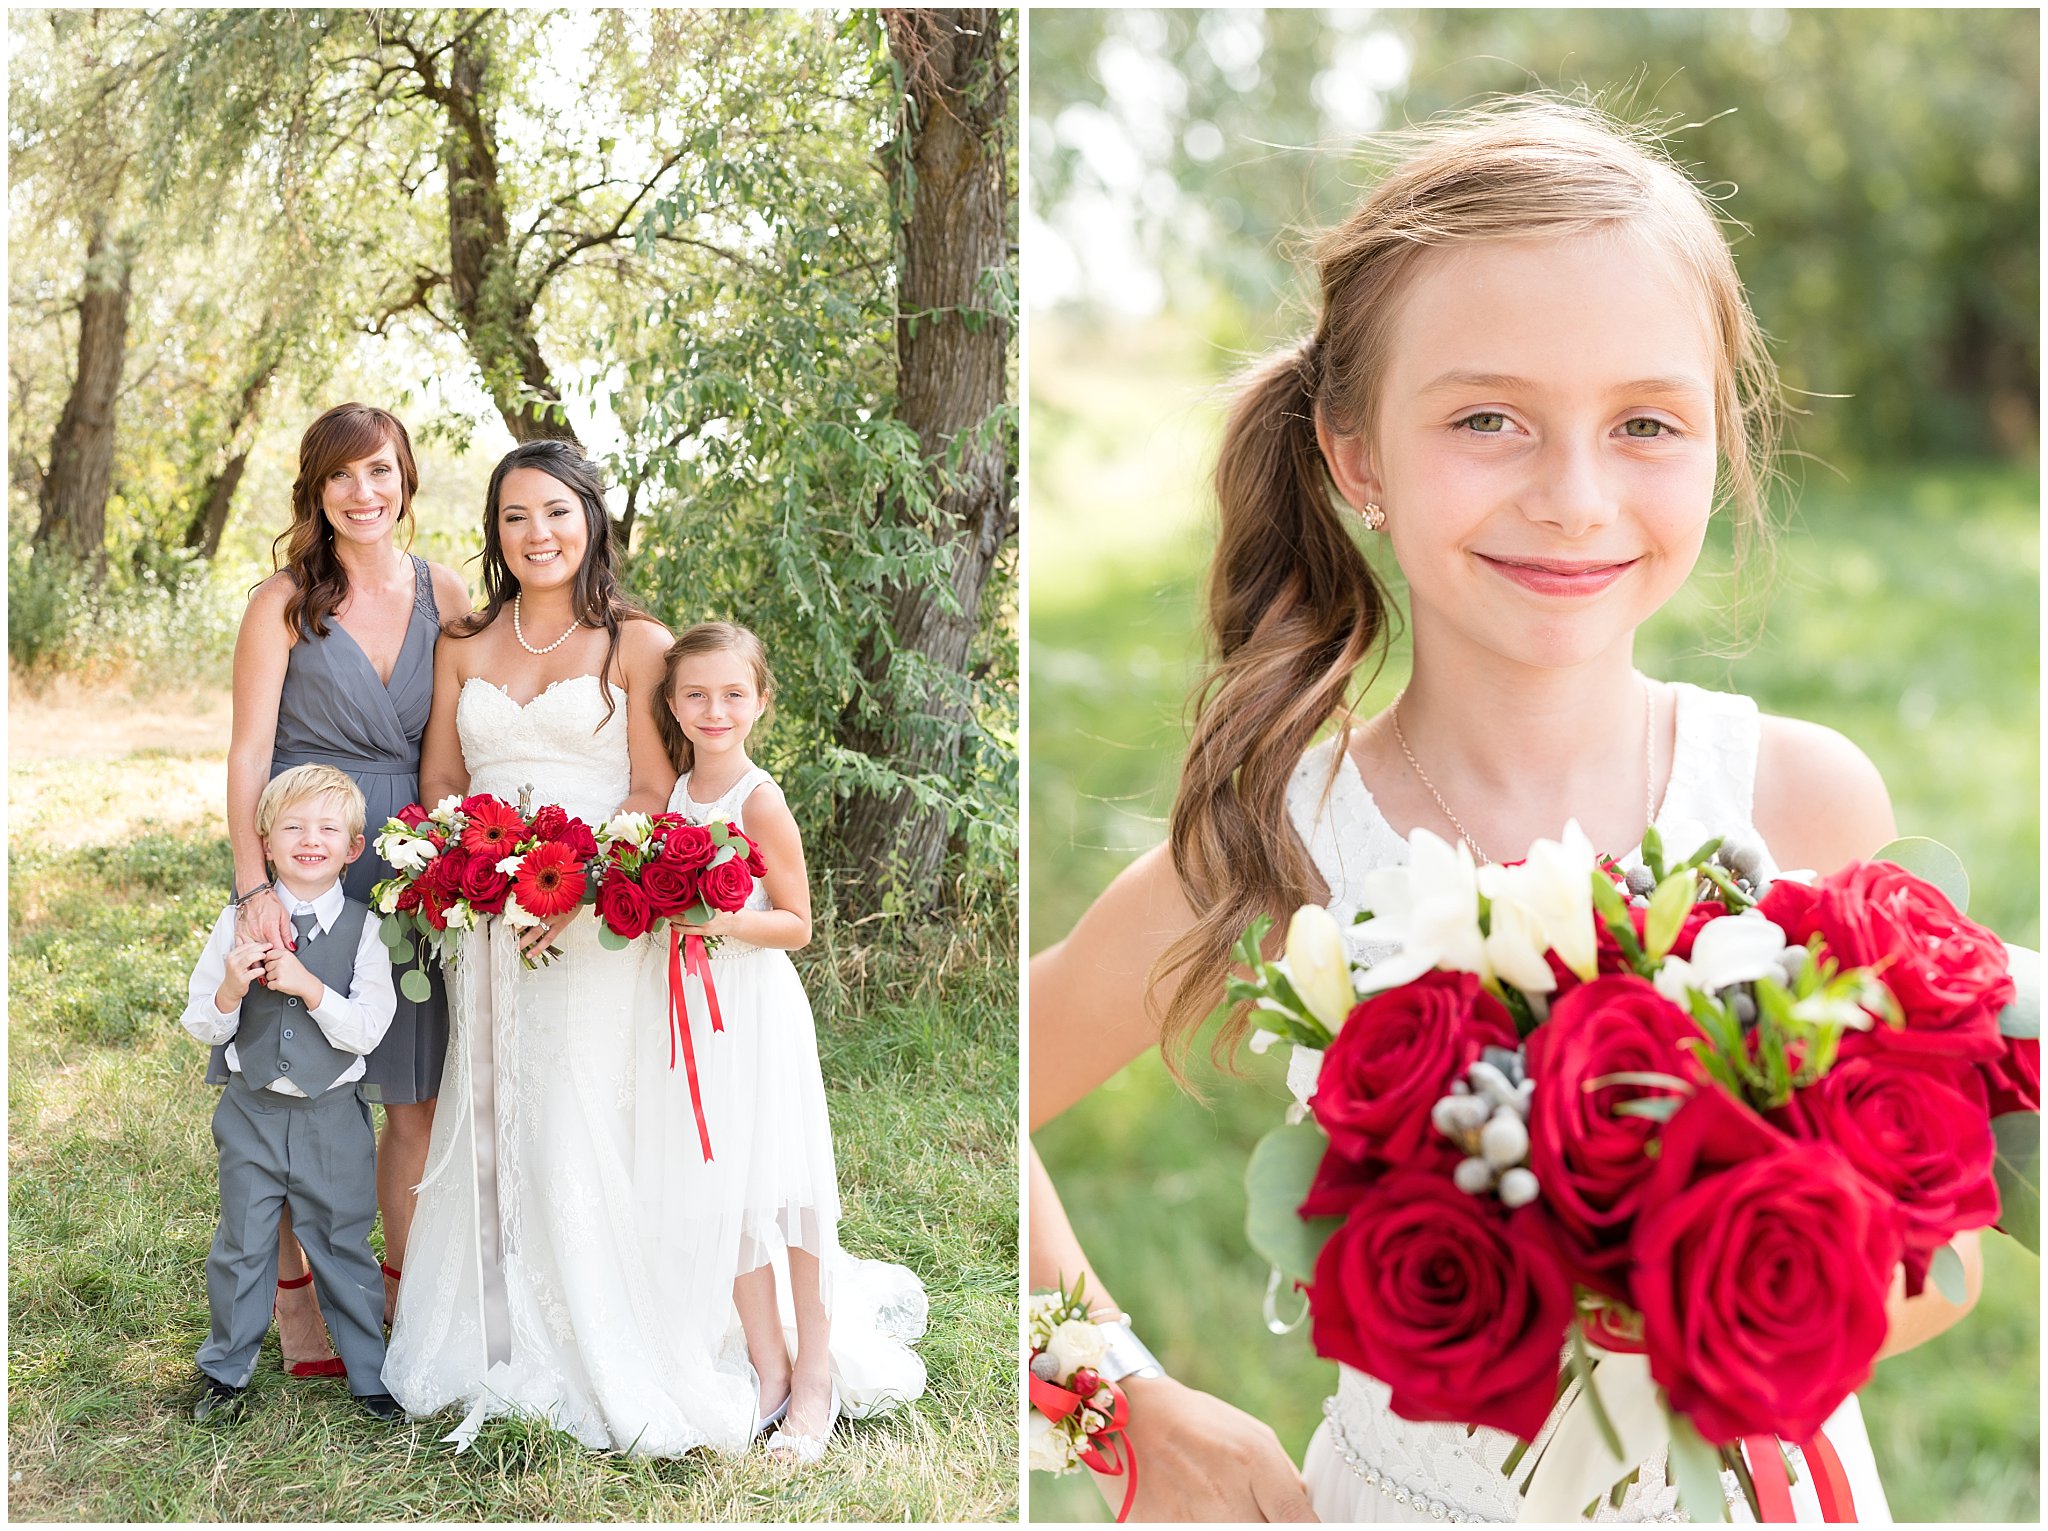 Bride, bridesmaid and kids | Red and Grey wedding | Davis County Outdoor Wedding | Jessie and Dallin Photography